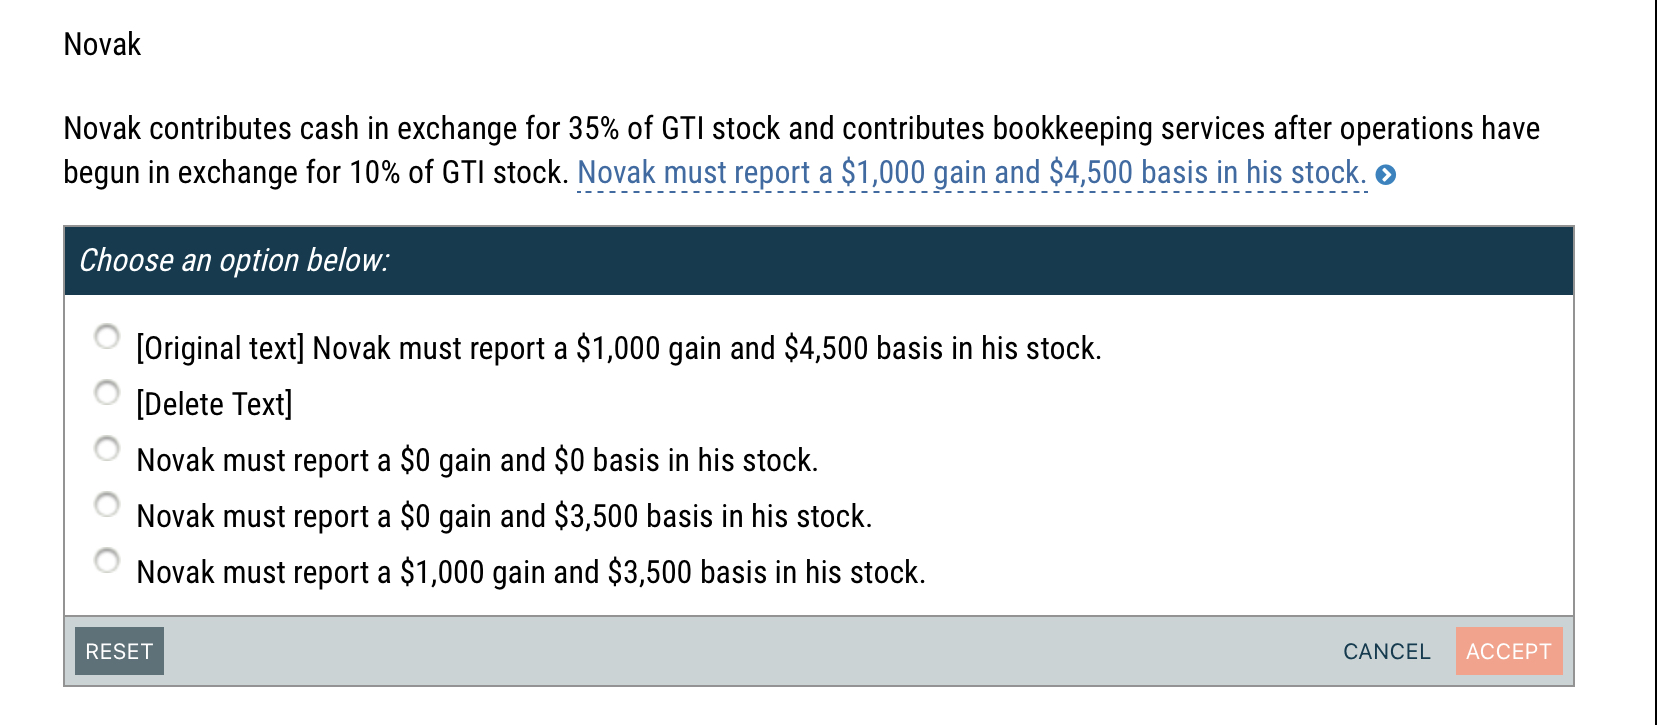 Novak Novak contributes cash in exchange for 35% of GTI stock and contributes bookkeeping services after